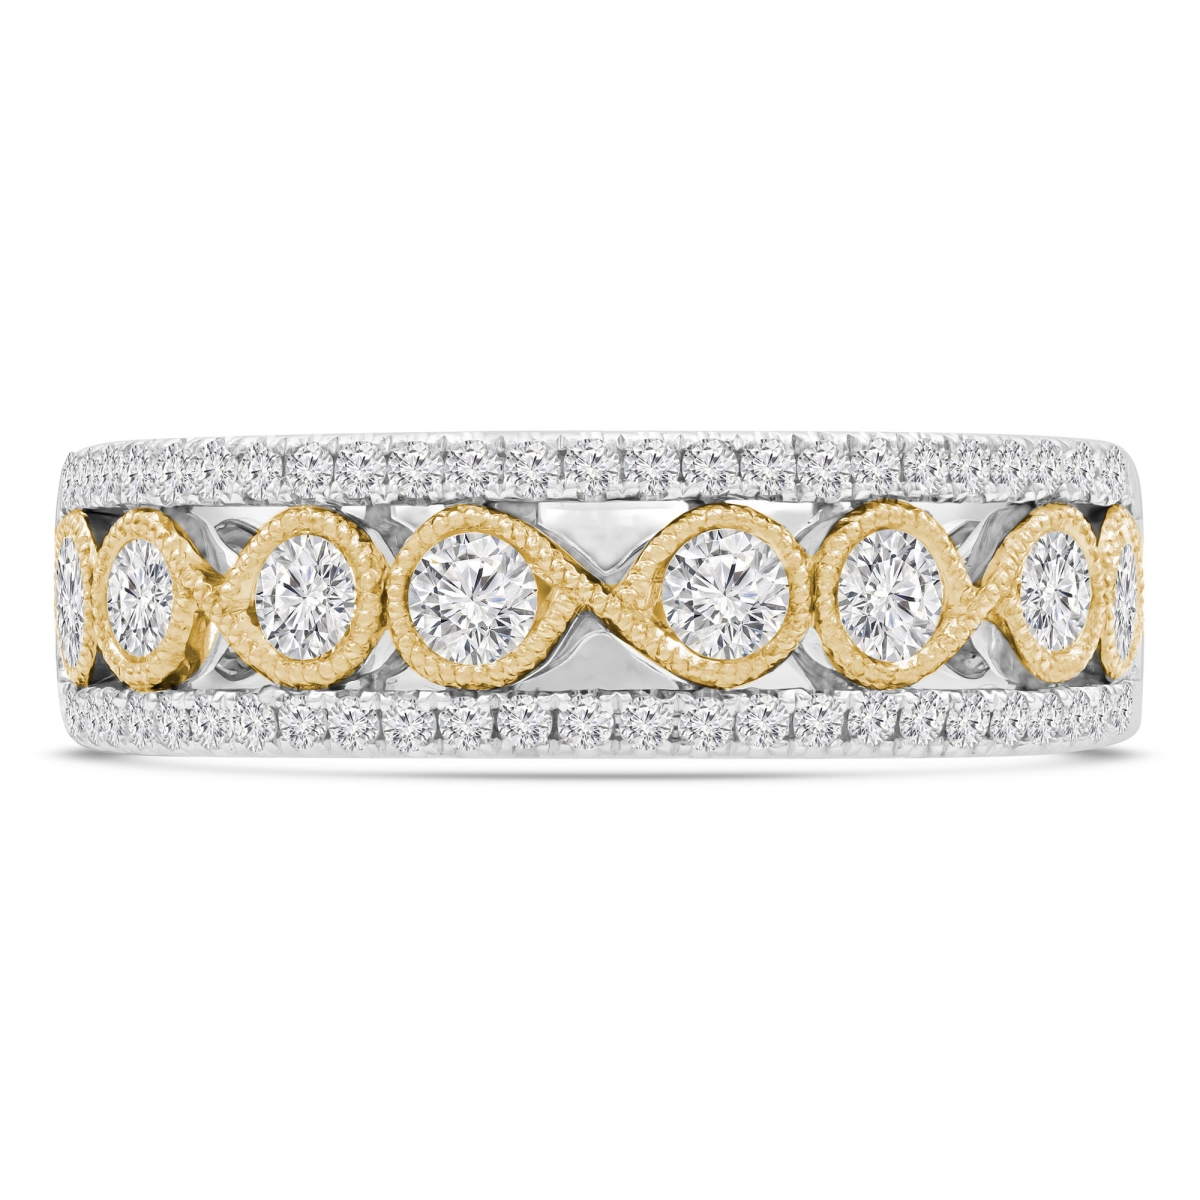 Picture of Majesty Diamonds MDR220224-4 0.67 CTW Round Diamond Vintage Infinity Semi-Eternity Anniversary Wedding Band Ring in 14K Two-Tone Gold - Size 4